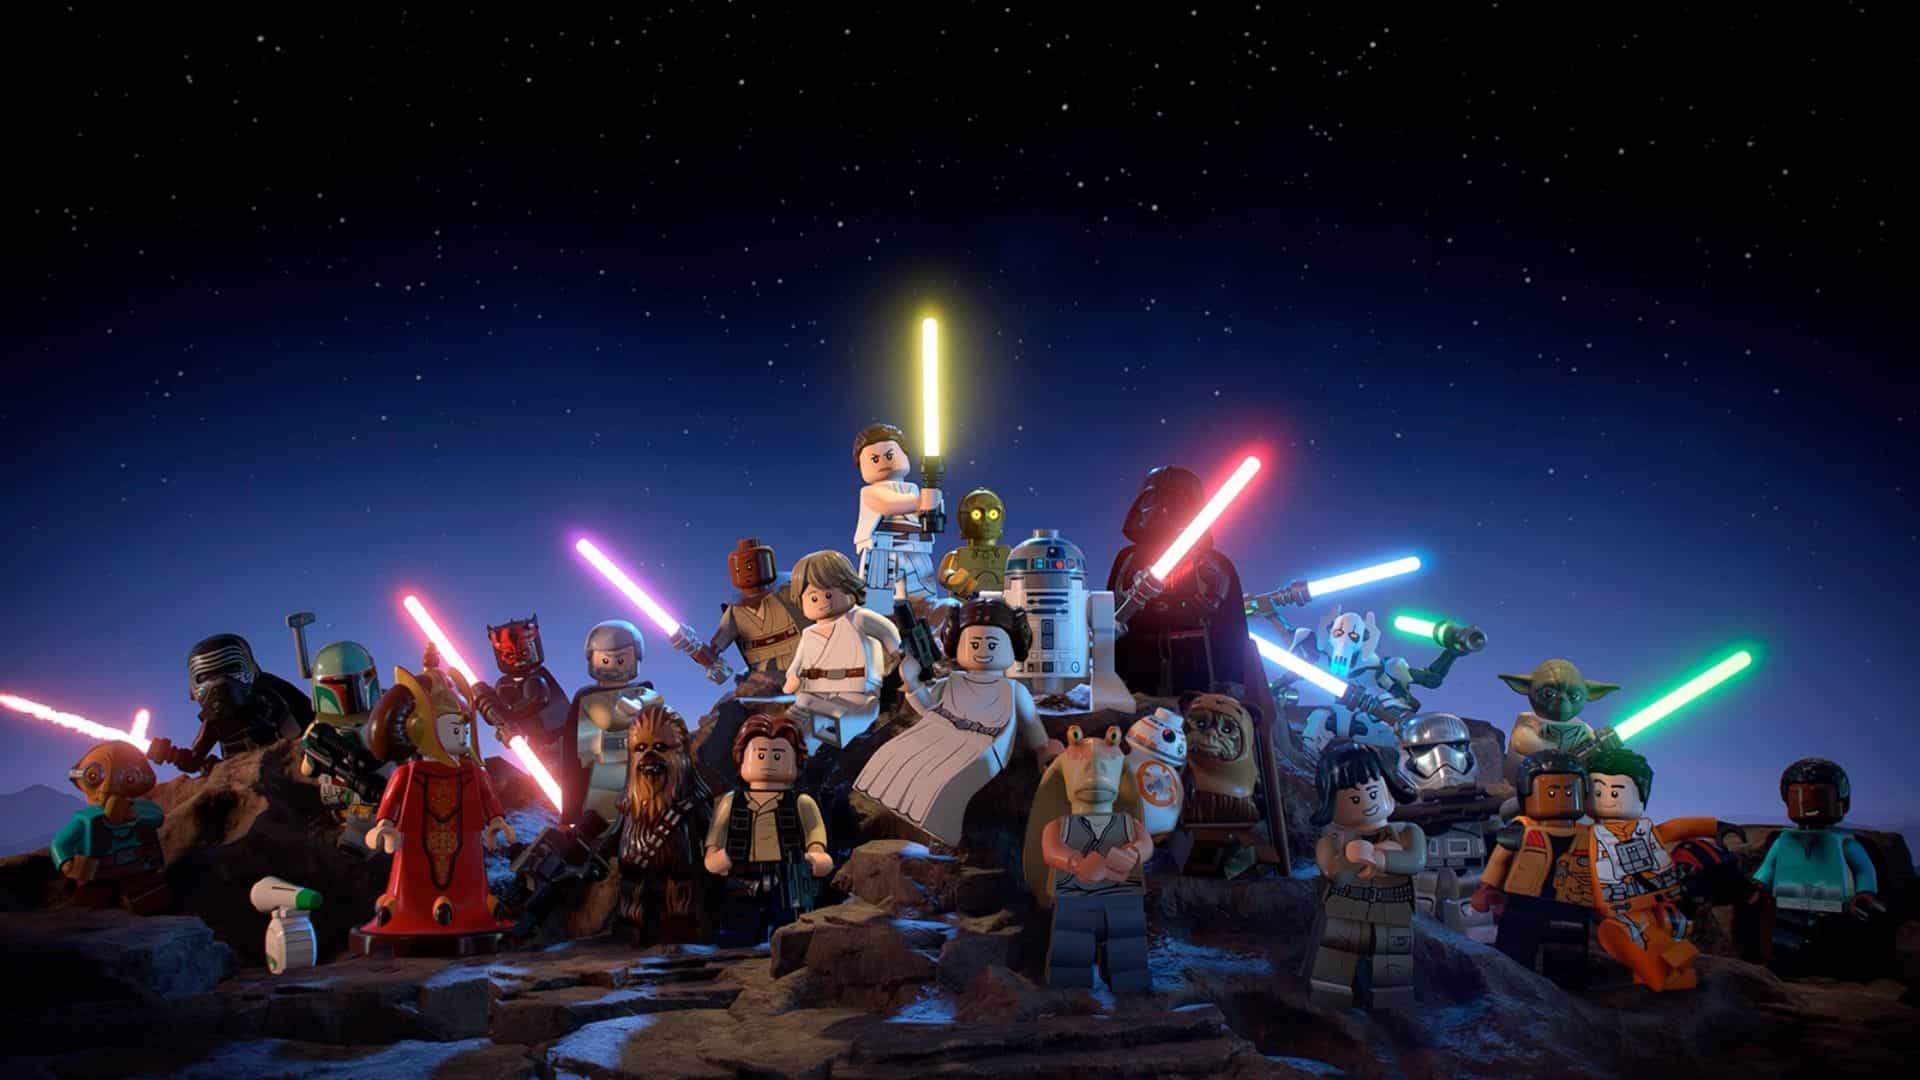 all the skywalker saga characters together